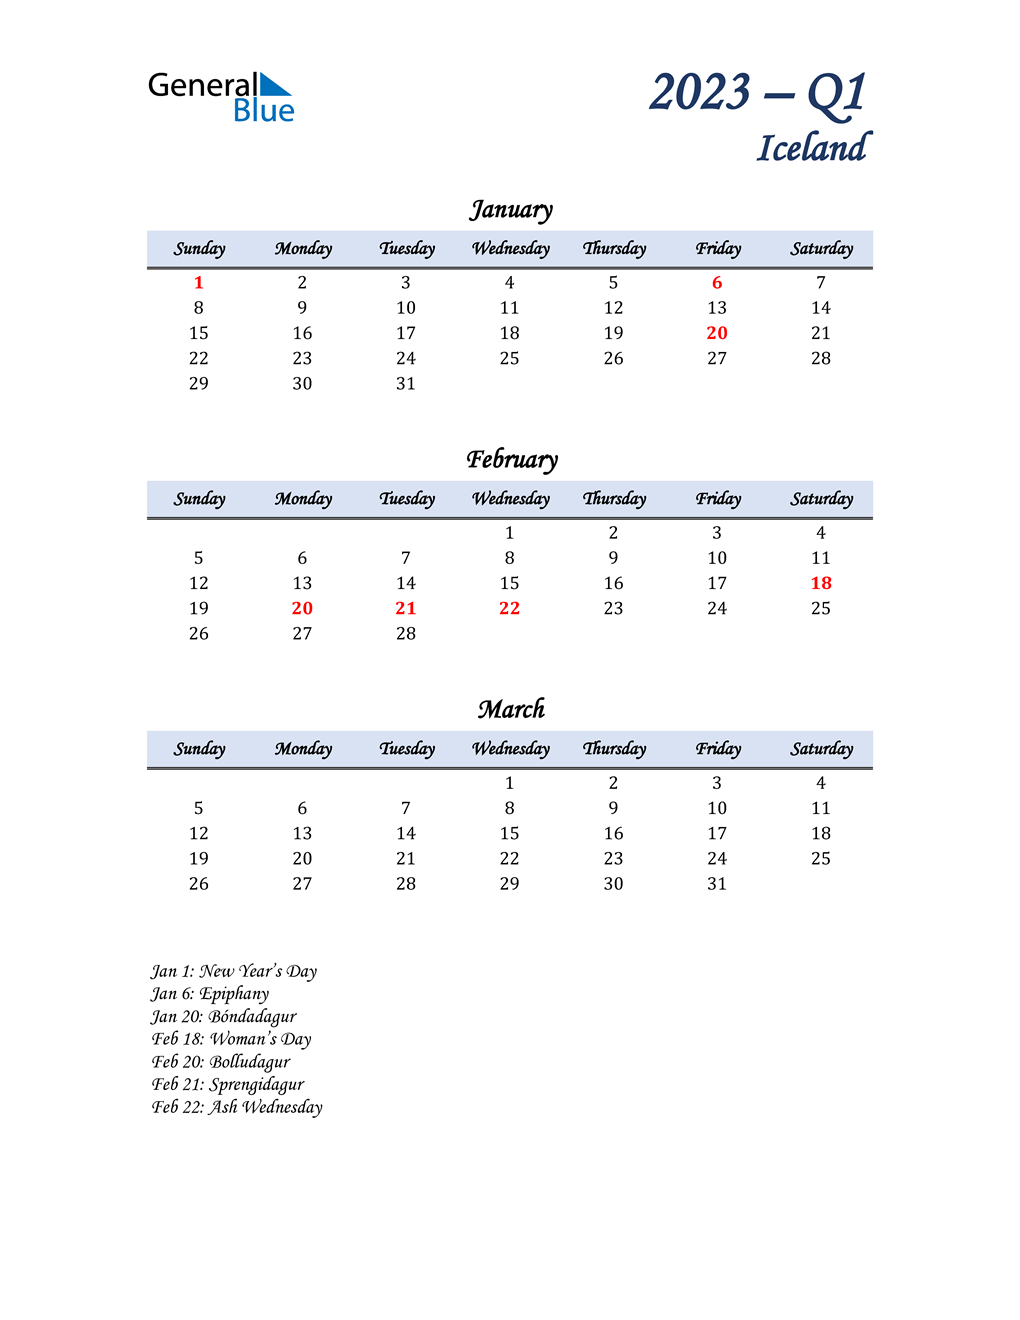  January, February, and March Calendar for Iceland